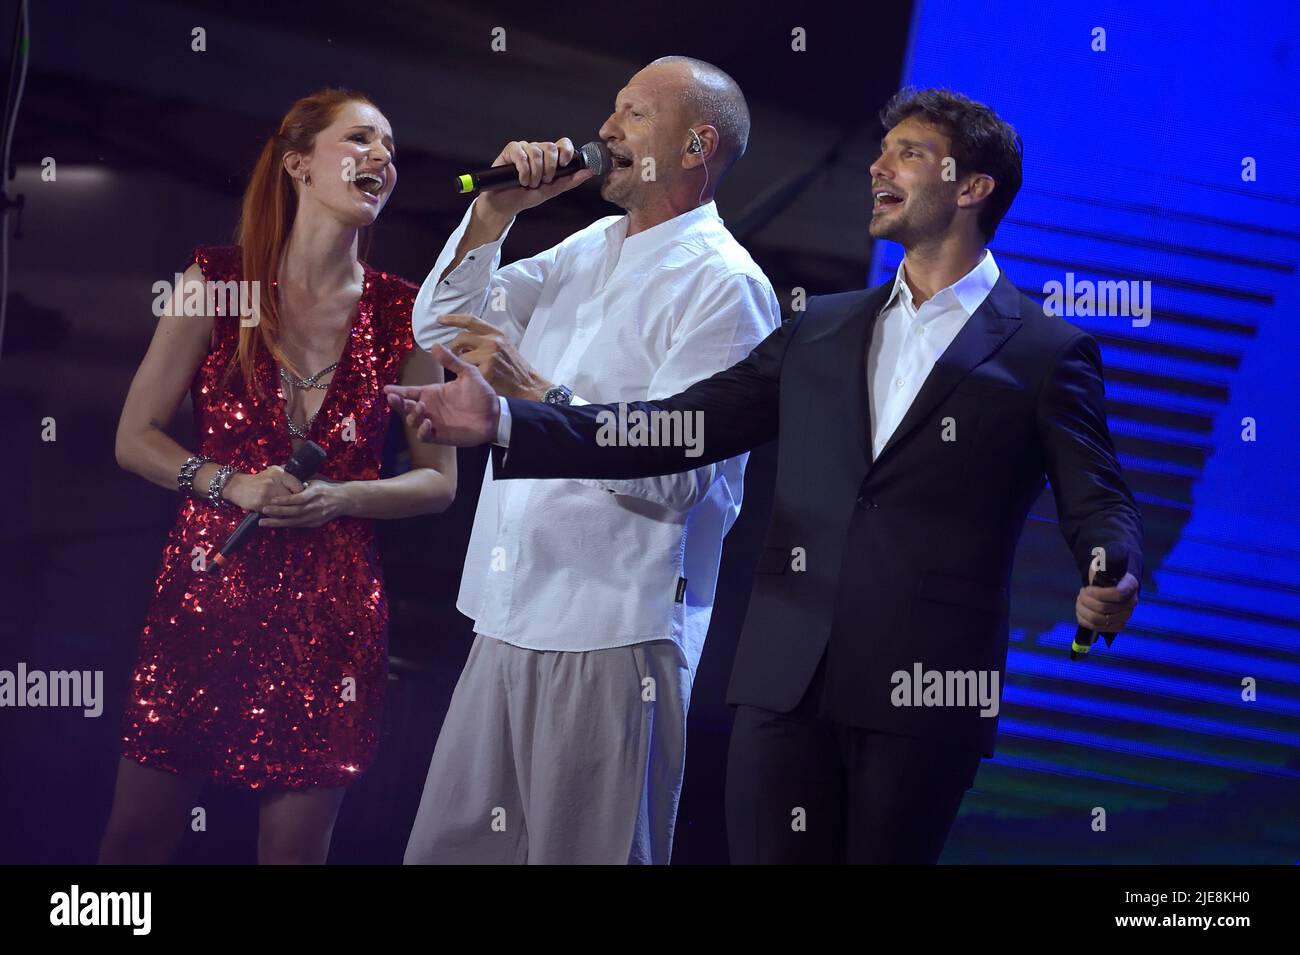 The Italian singer Biagio Antonacci during the recording of the TIM Summer Hits musical event conducted by Andrea Delogu and Stefano De Martino. A series of concerts in the Italian squares broadcast on Rai2. Piazza del Popolo (Rome) Italy, June 24, 2022 Stock Photo